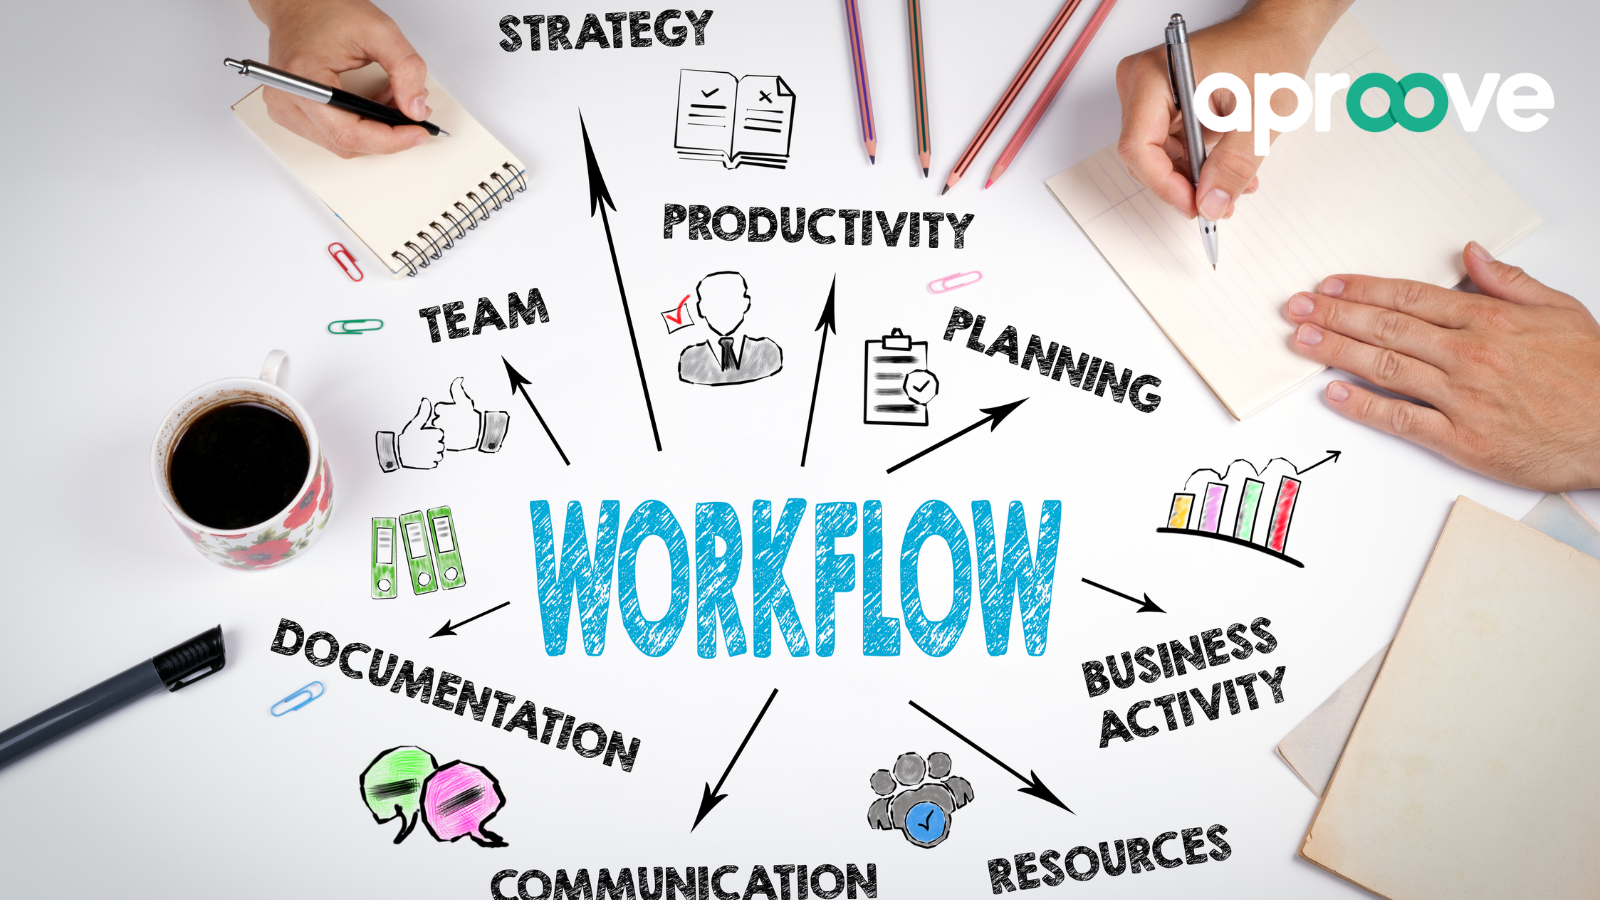 Why marketing workflow management is important for businesses - Aproove